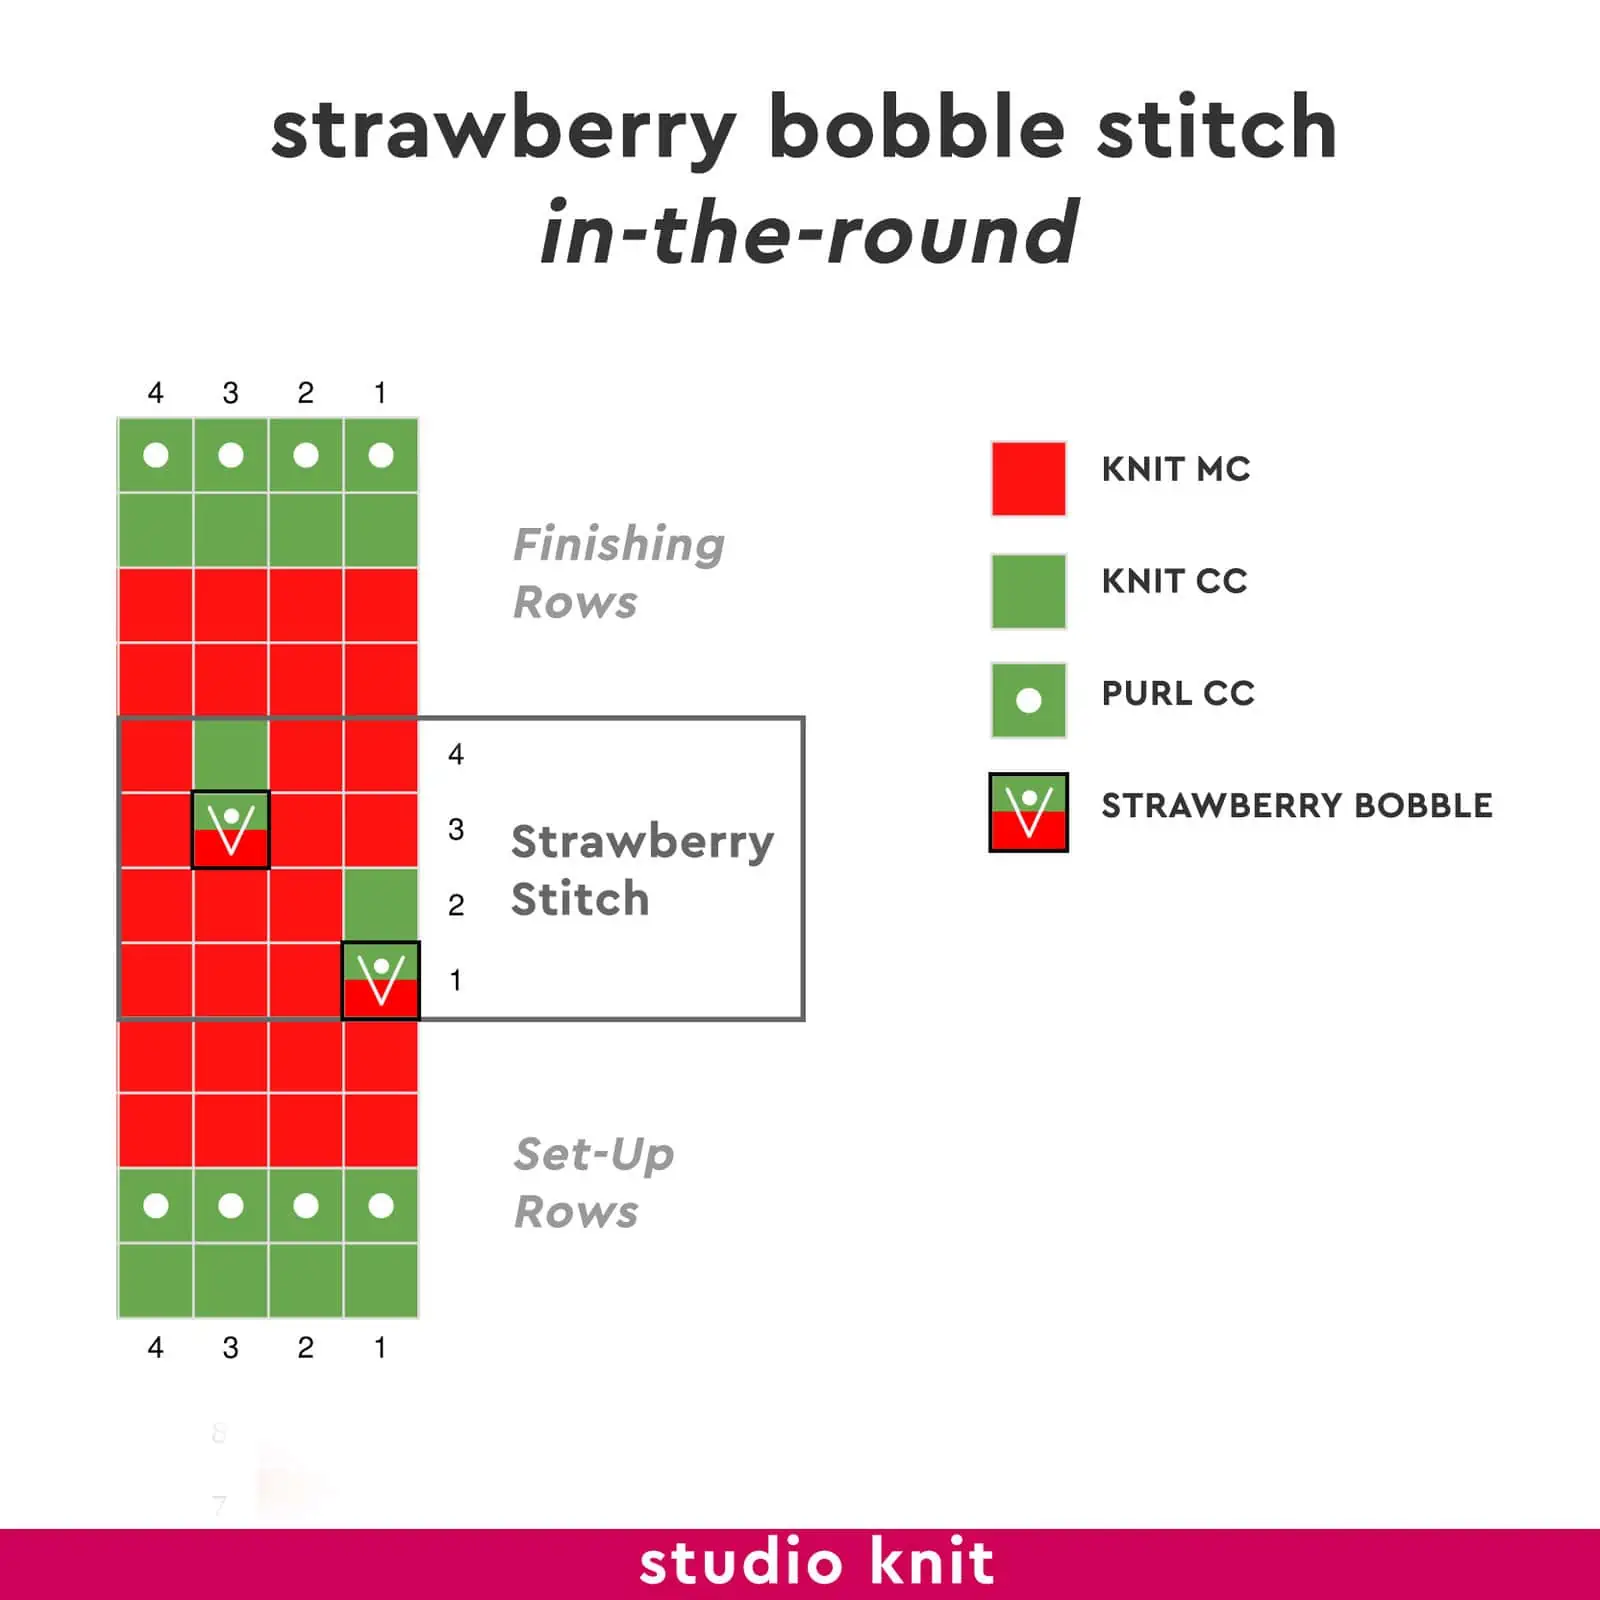 Knitting chart of the Strawberry Bobble Stitch in-the-round by Studio Knit.